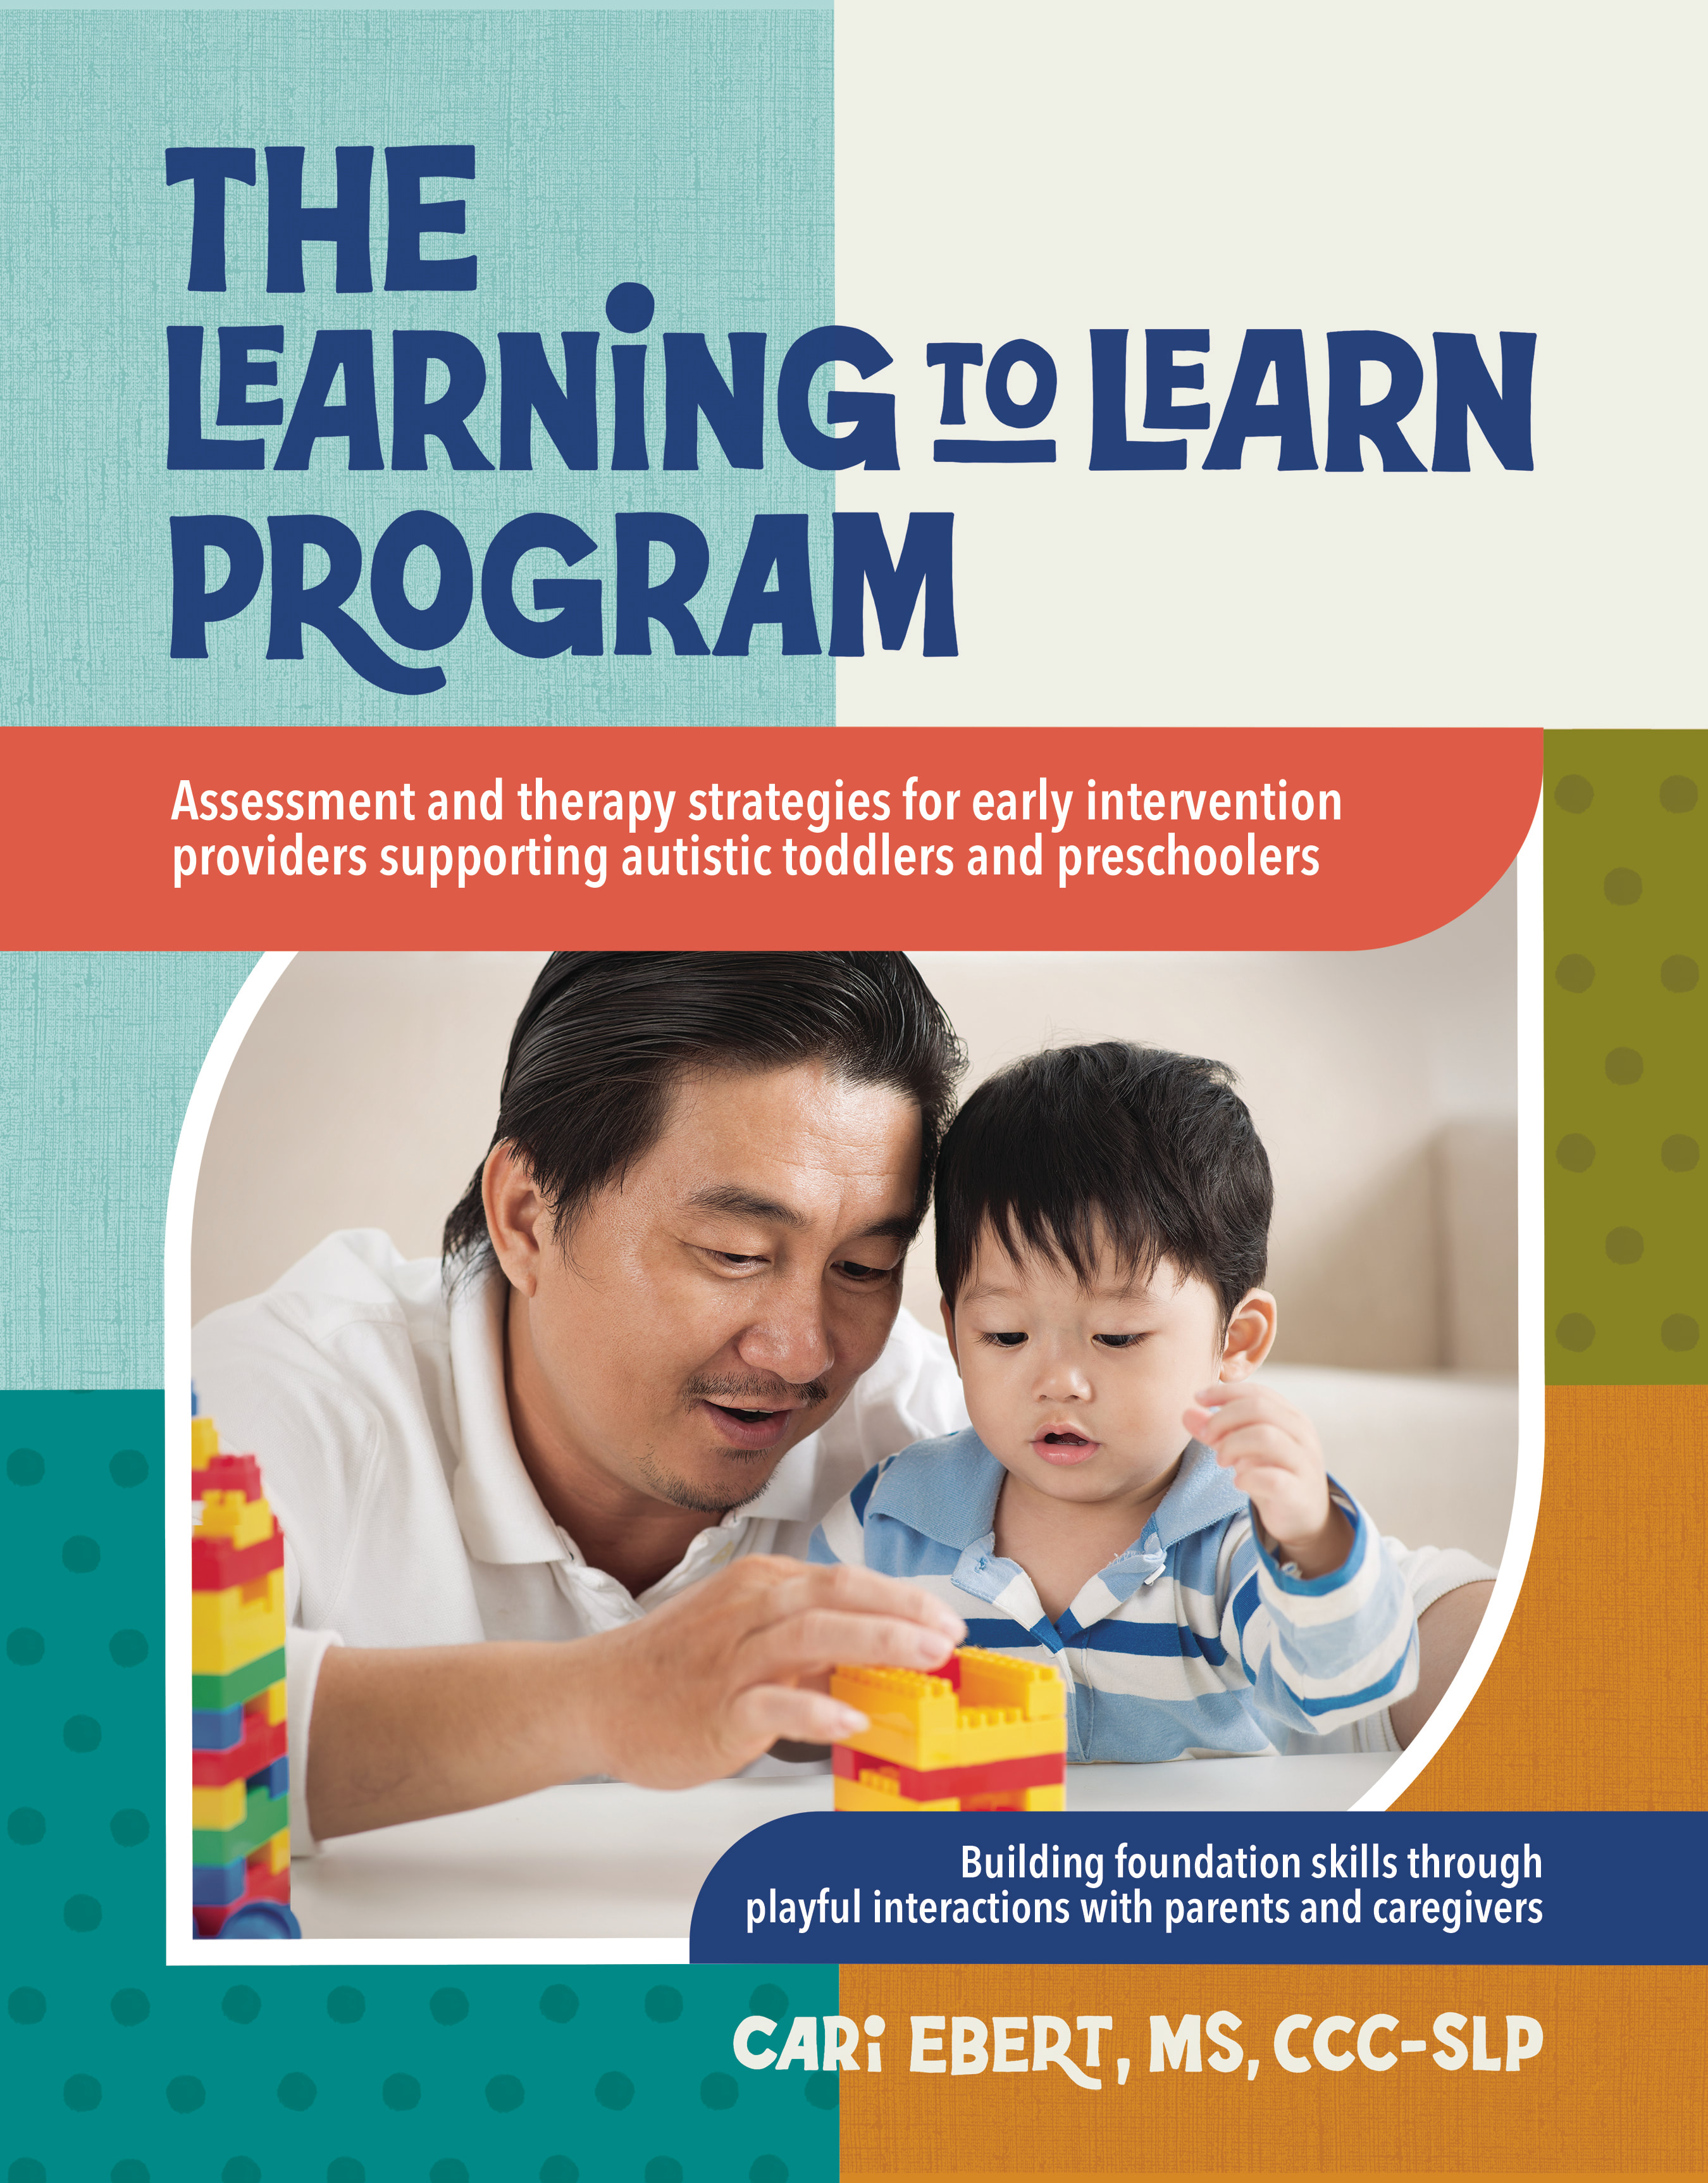 Learn　The　Program　Learning　to